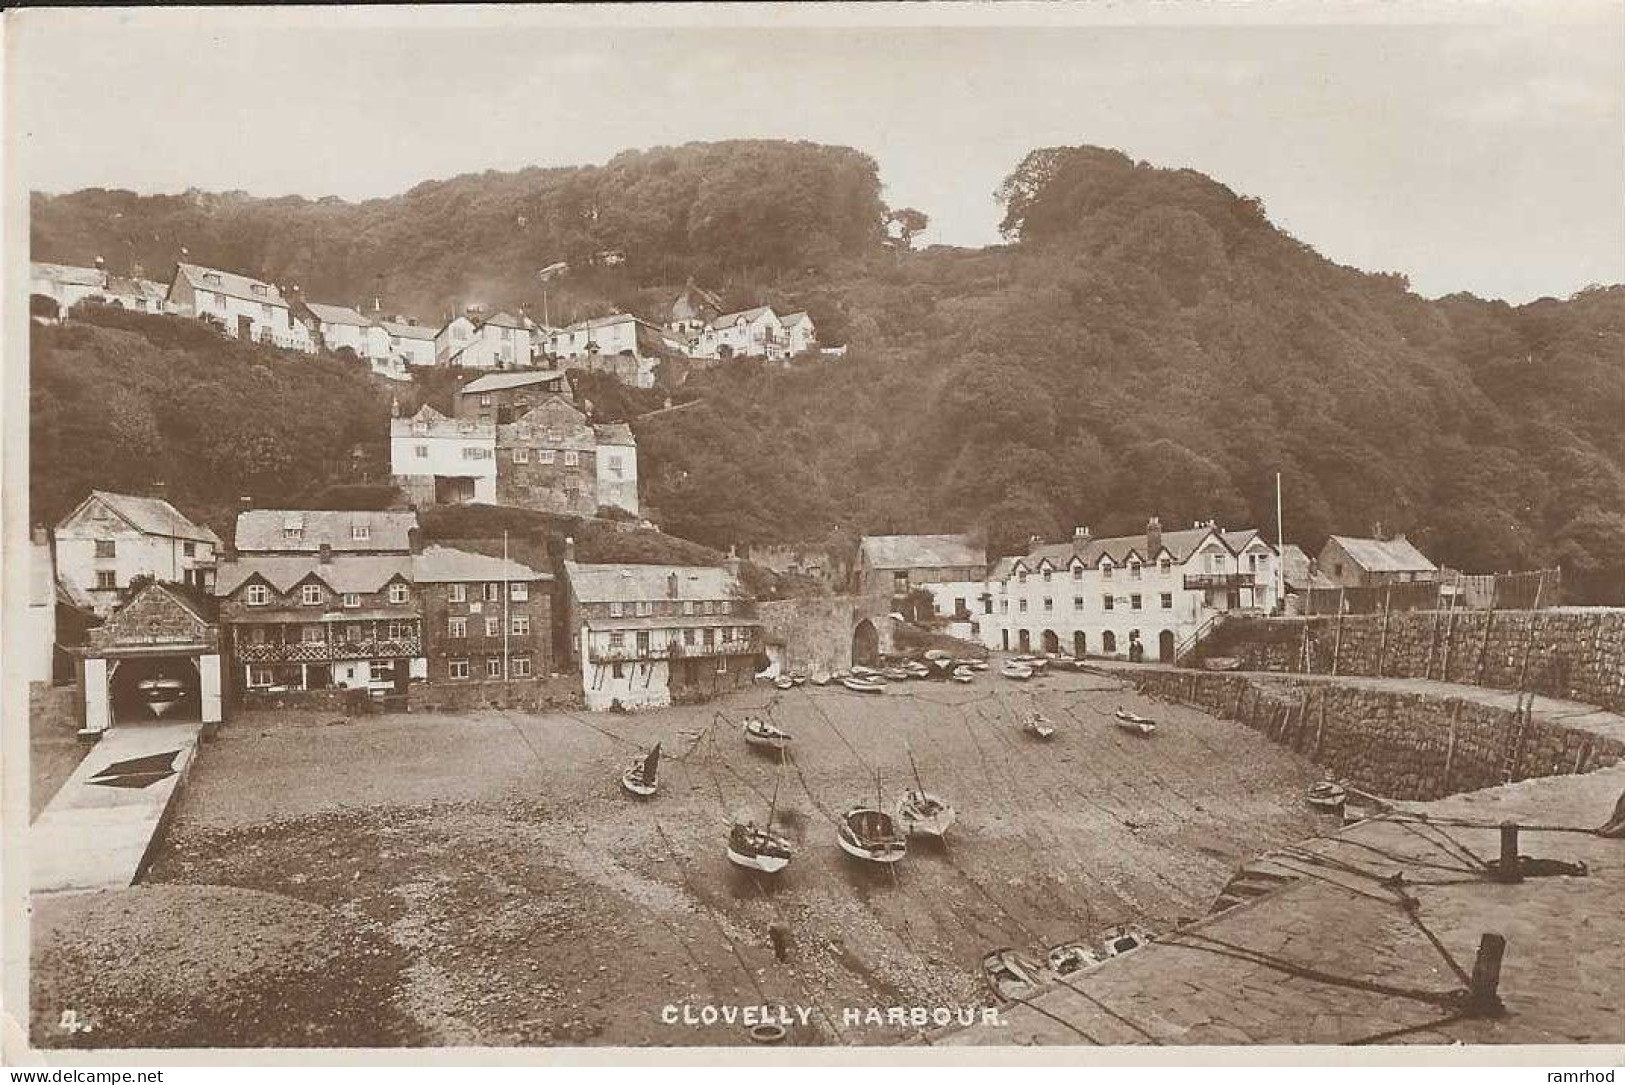 CLOVELLY, Harbour (Publisher - Tuck's) Date - Unknown, Unused (Vintage Real Photograph) - Clovelly